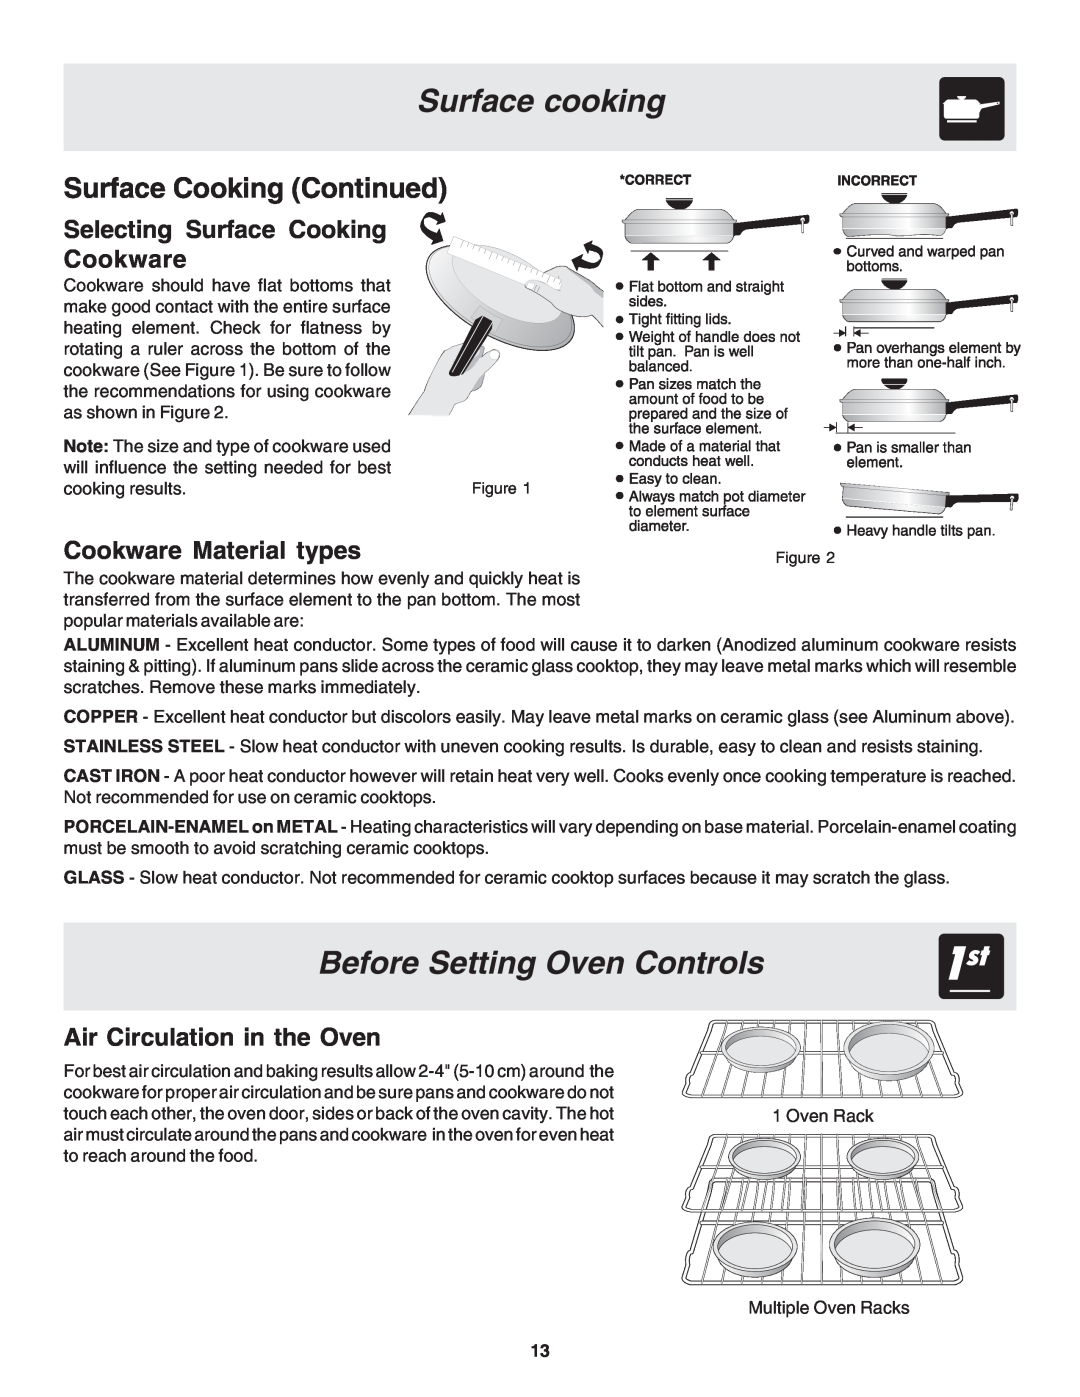 Frigidaire 318203821 Surface cooking, Before Setting Oven Controls, Surface Cooking Continued, Cookware Material types 